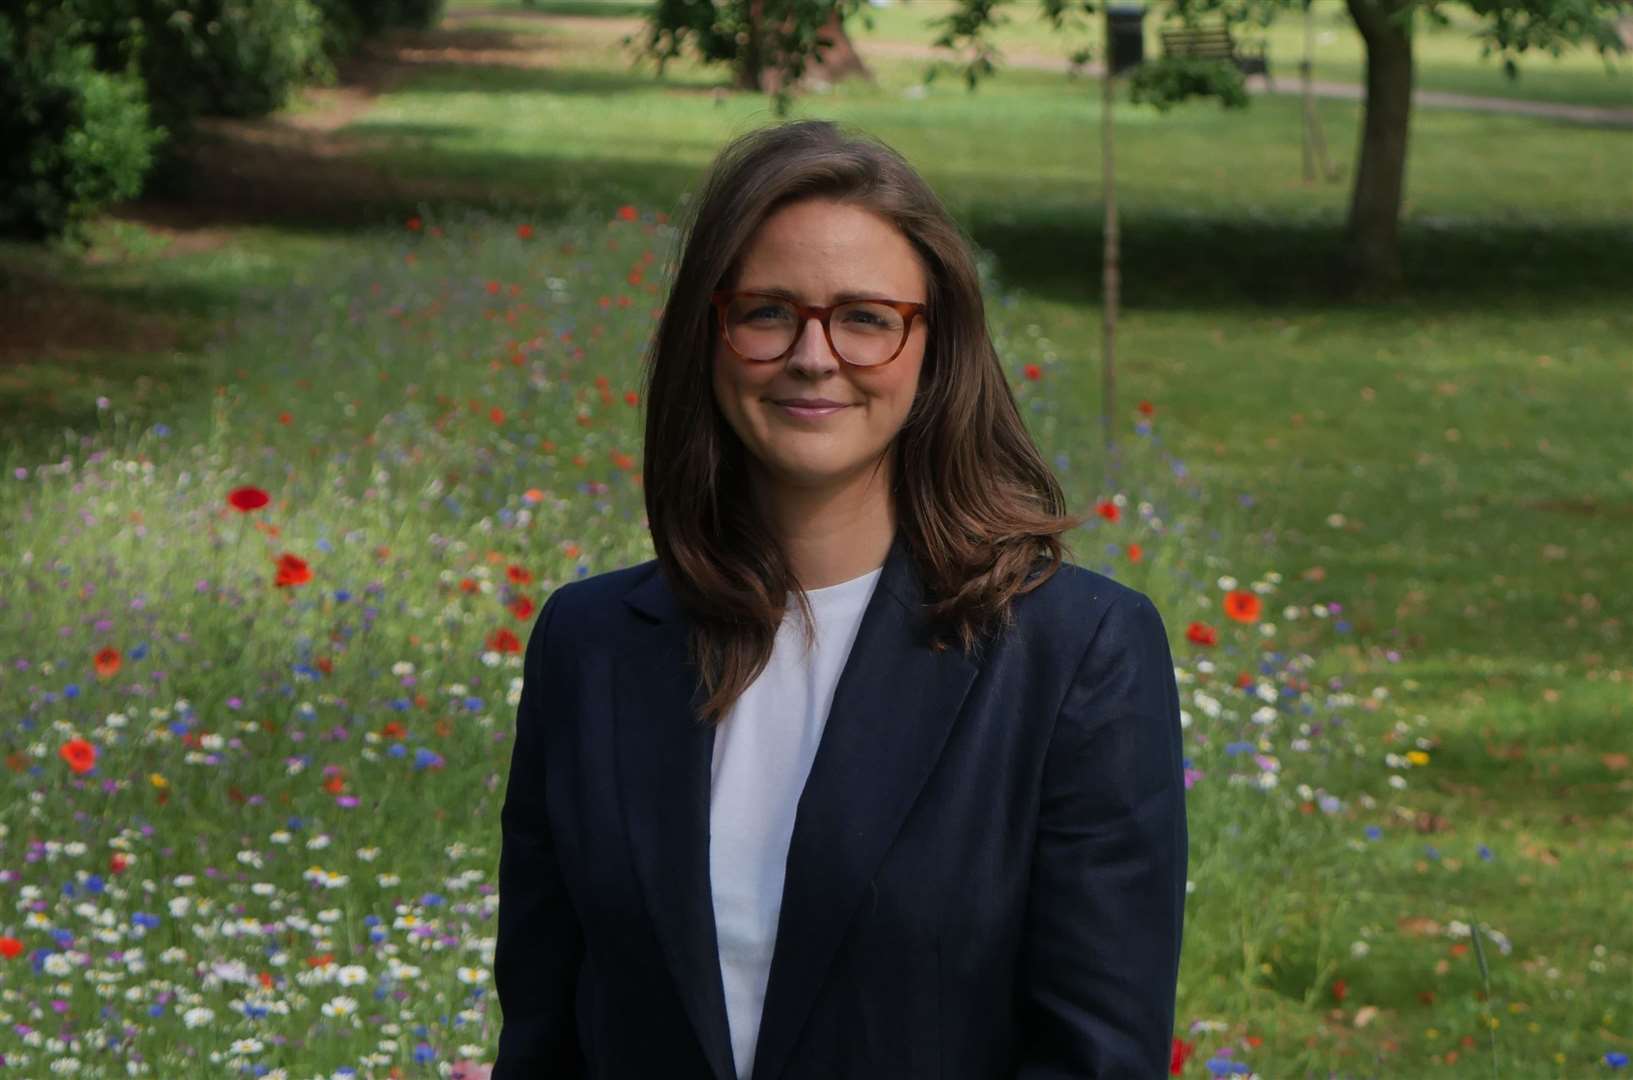 Cllr Lauren Edwards believes the new Innovation Hub will deliver the twin benefit of both helping new businesses and increasing footfall for existing tenants at the Pentagon